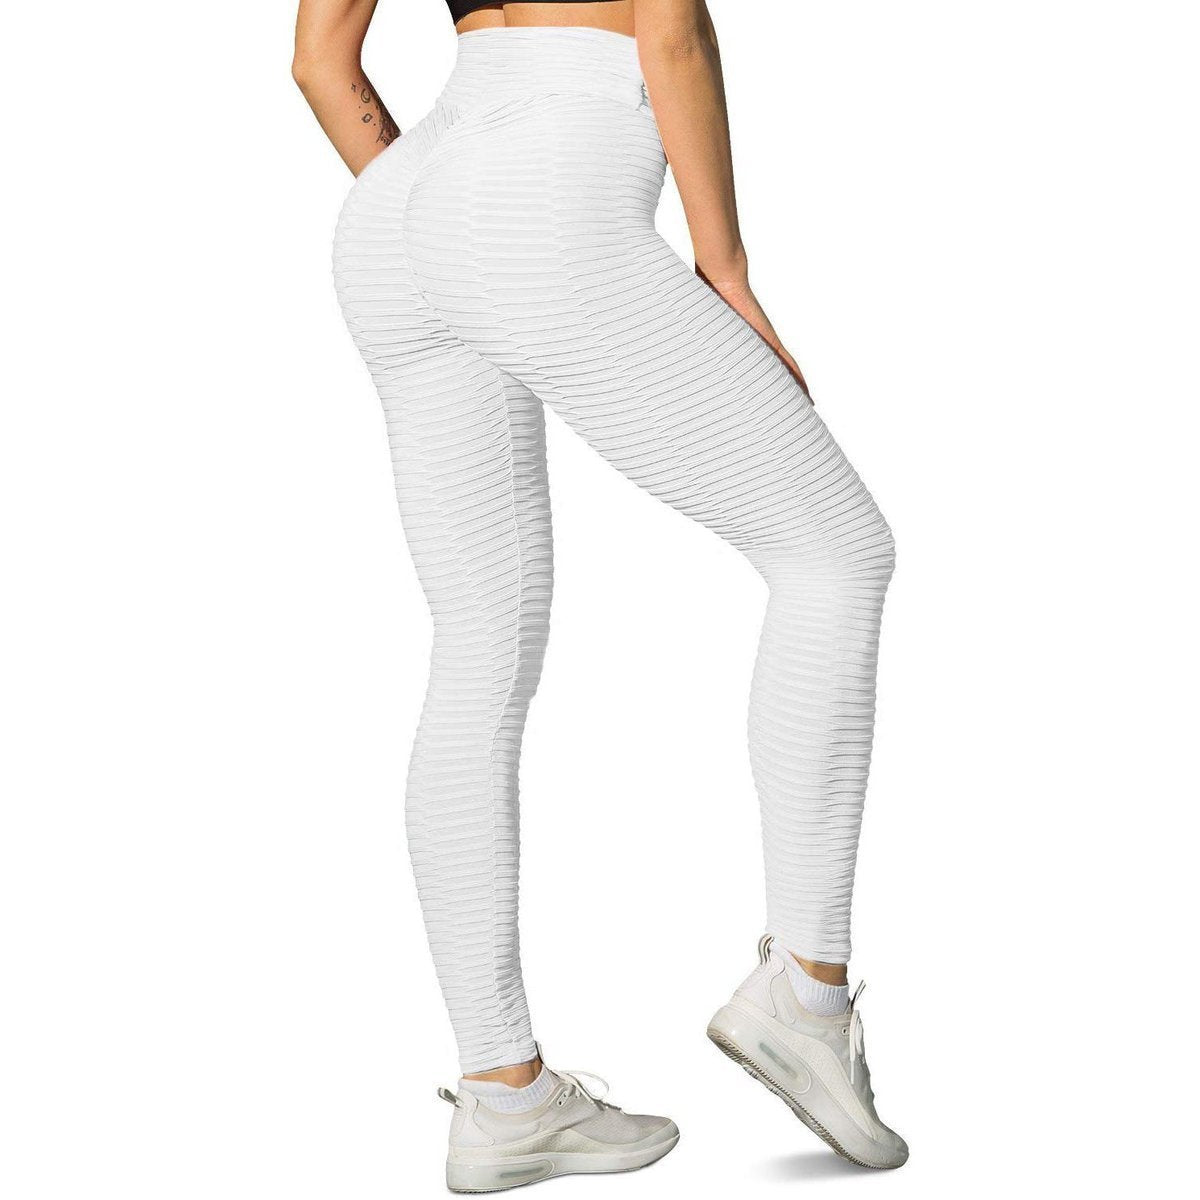 Gym Leggings That Cover Cellulite Lotion